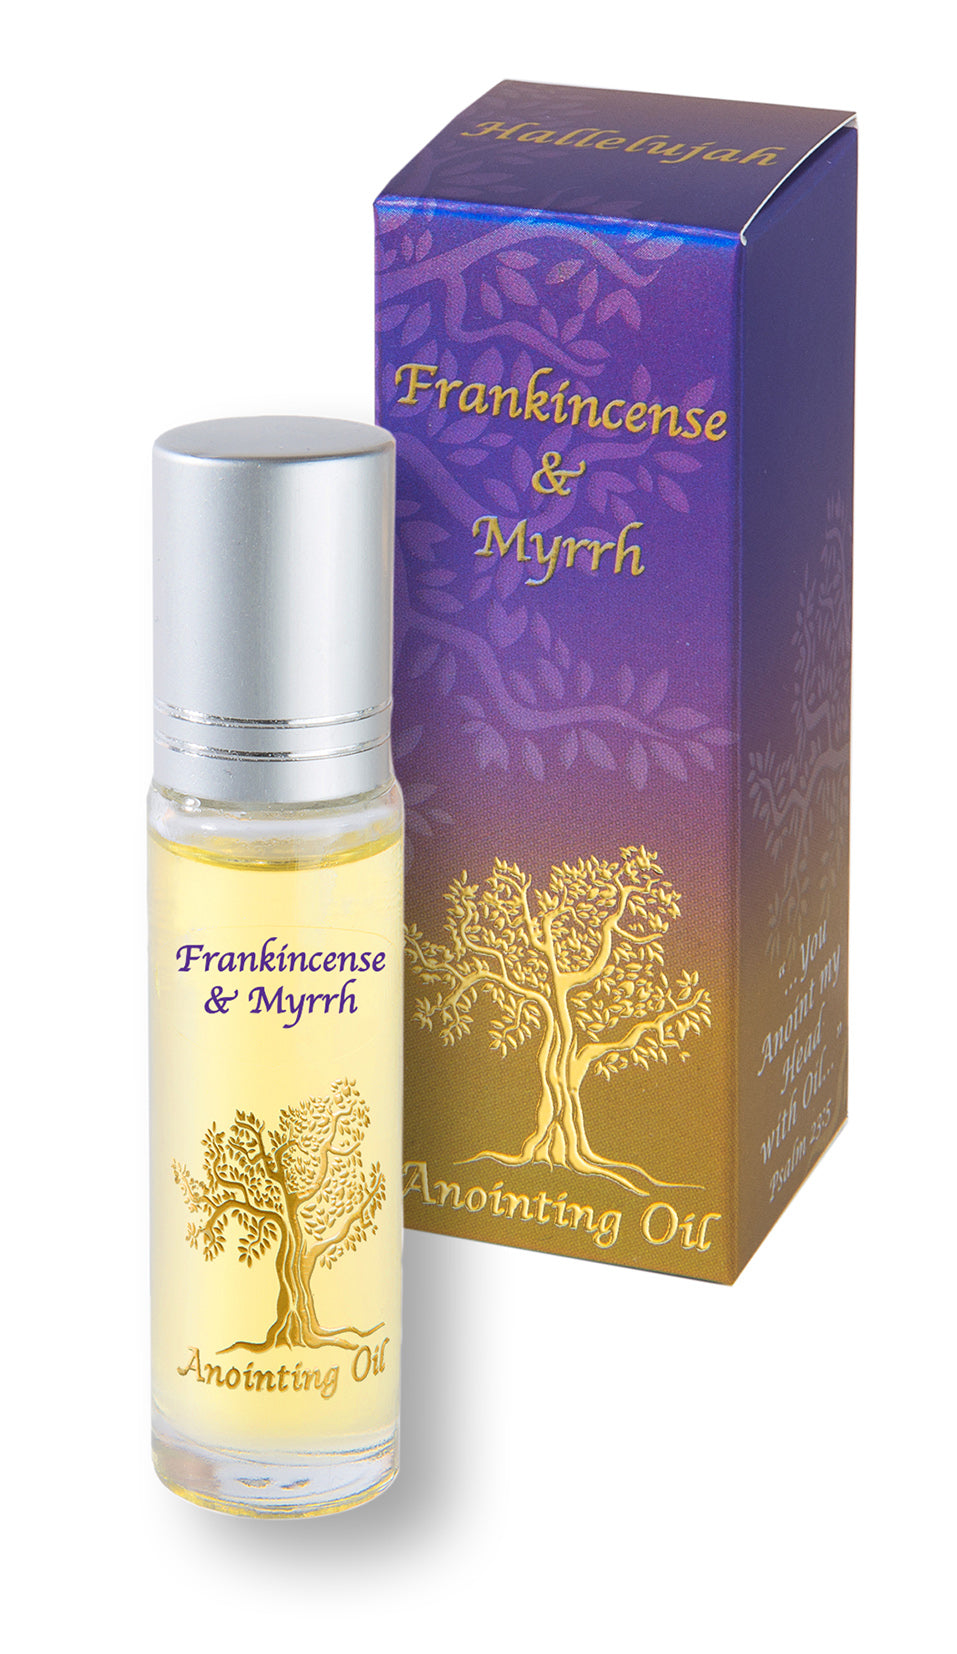 Anointing Oil Singapore, Frankincense, Myrrh, Cinnamon, Holy Spirit, Our  Comforter, Counsellor, Teacher, Essential Oils and Accessories